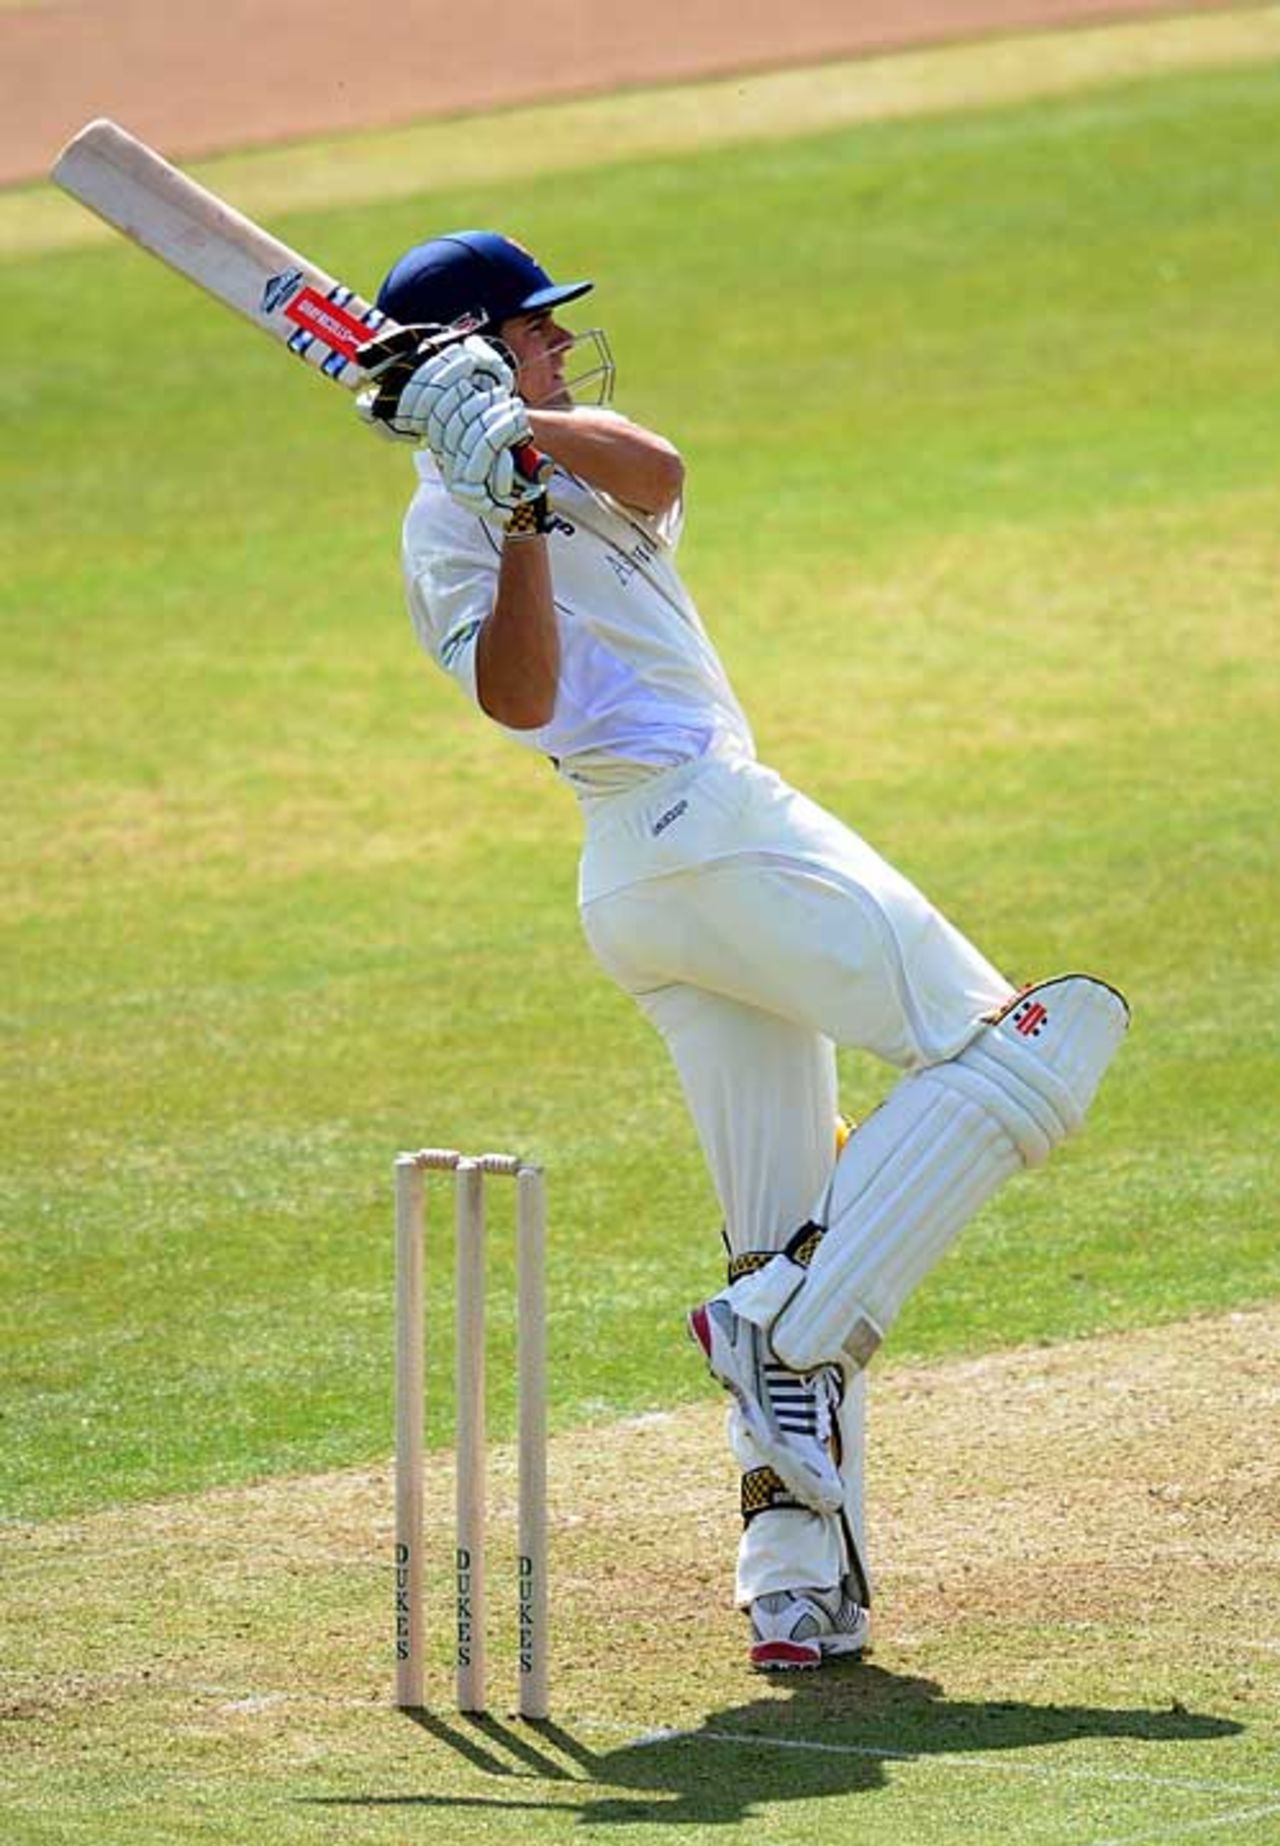 Alastair Cook plays an impressive pull on his return from injury, Essex v West Indies, Chelmsford, April 25, 2009